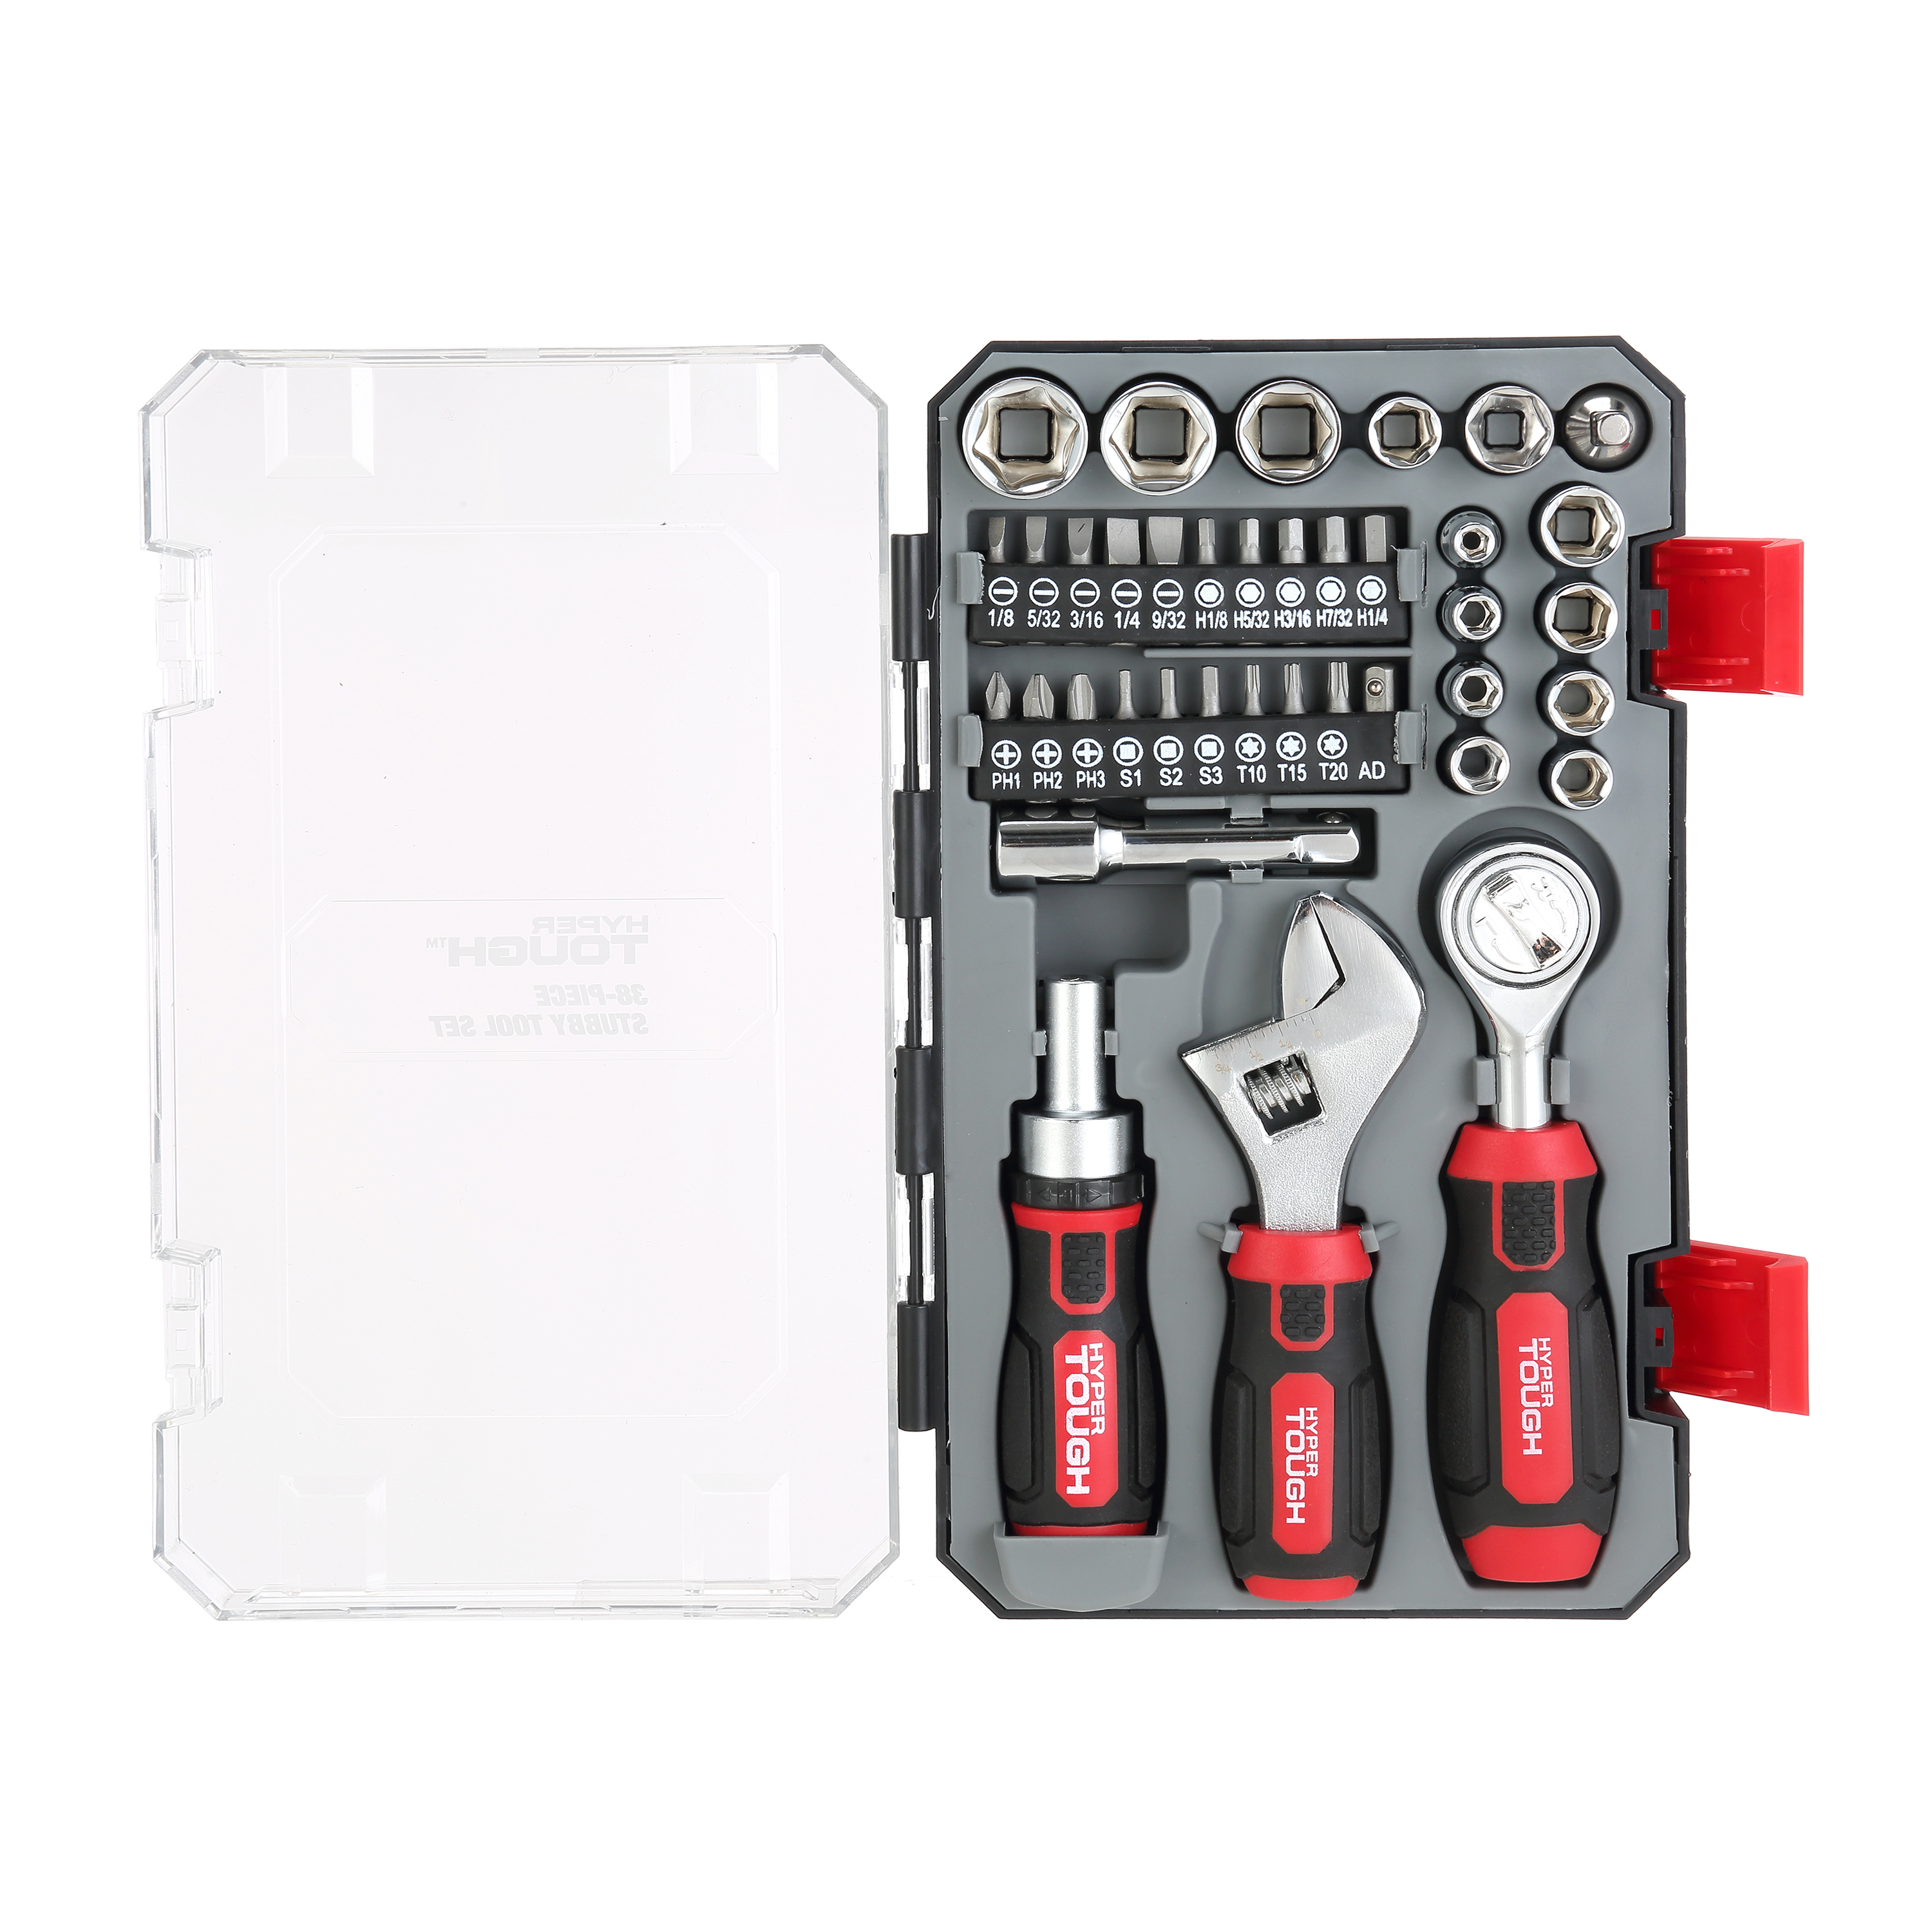 Hyper Tough 38 Piece Multi-Size Stubby Wrench and Socket Set For Home Use - image 3 of 13